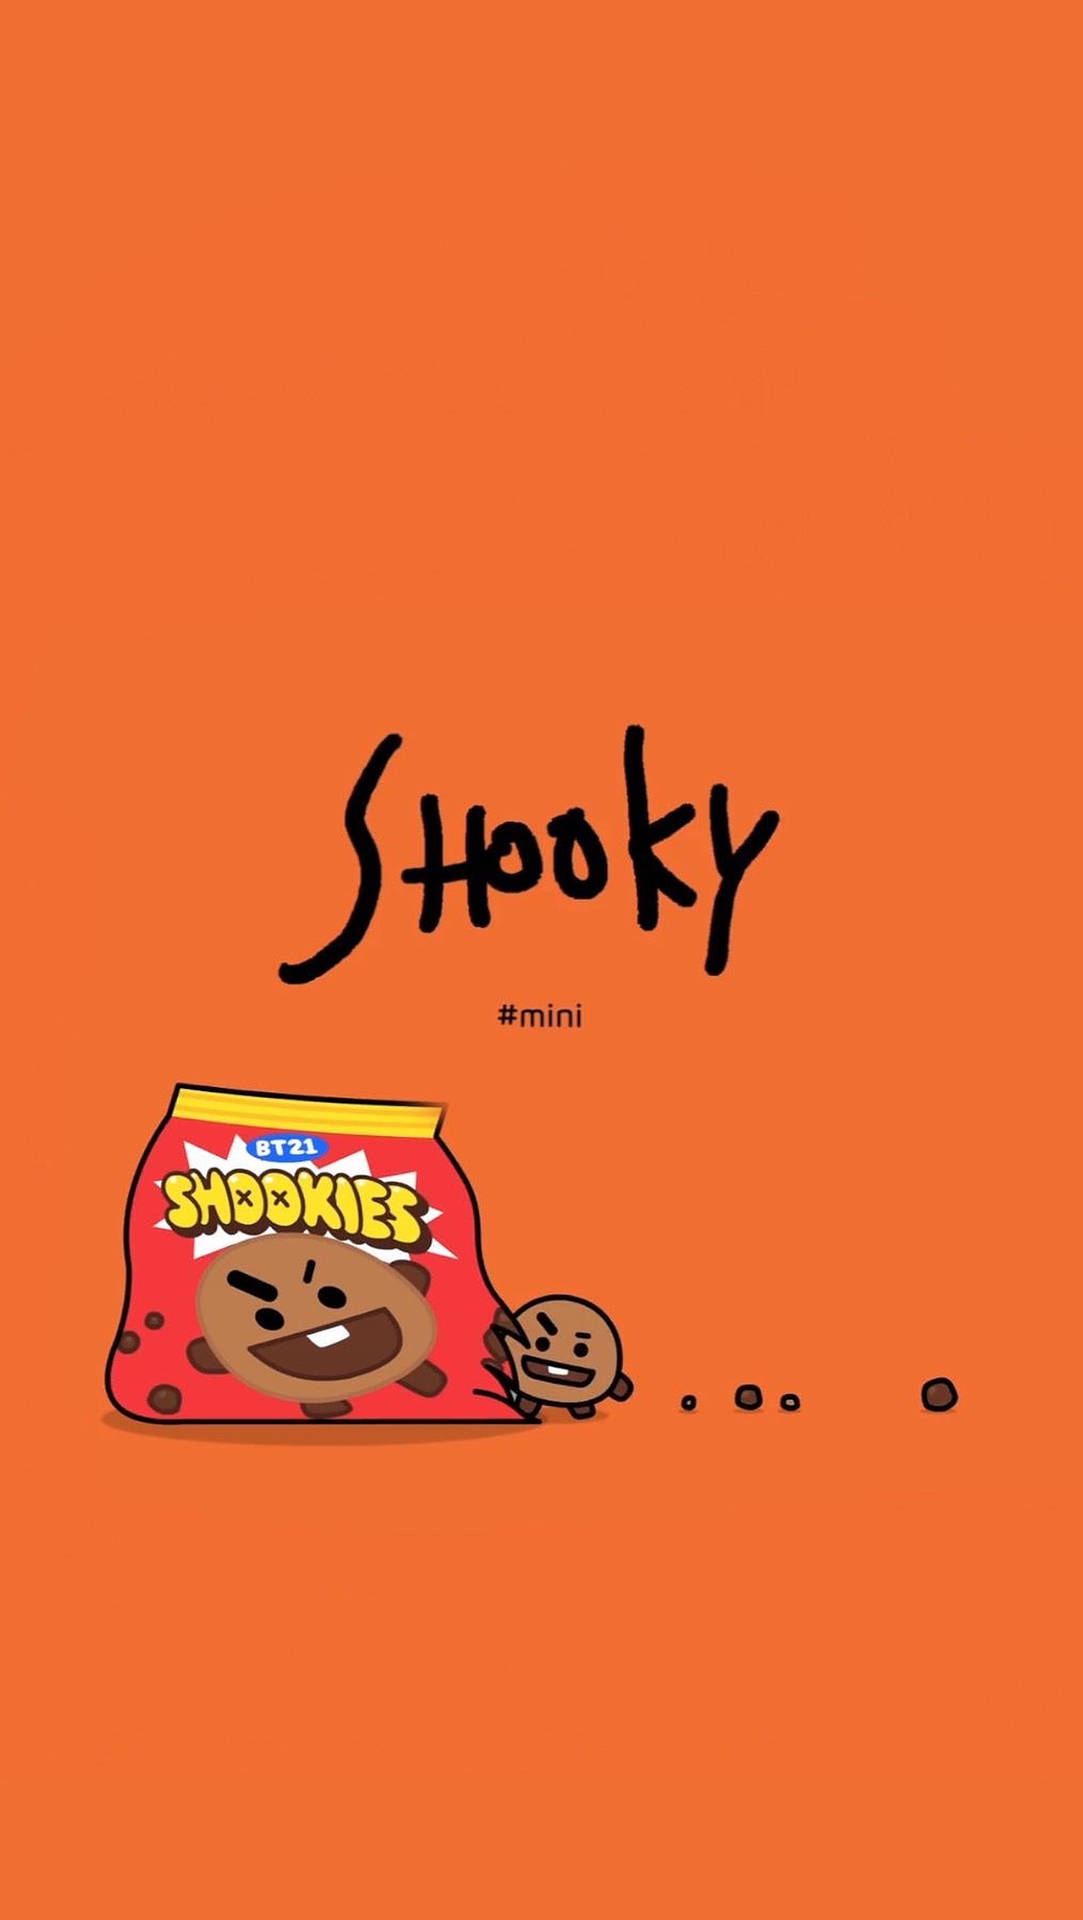 Shooky,bt21, Shookies. (no Translation Needed, As These Are Proper Names That Do Not Have A Direct Translation In Spanish.) Fondo de pantalla